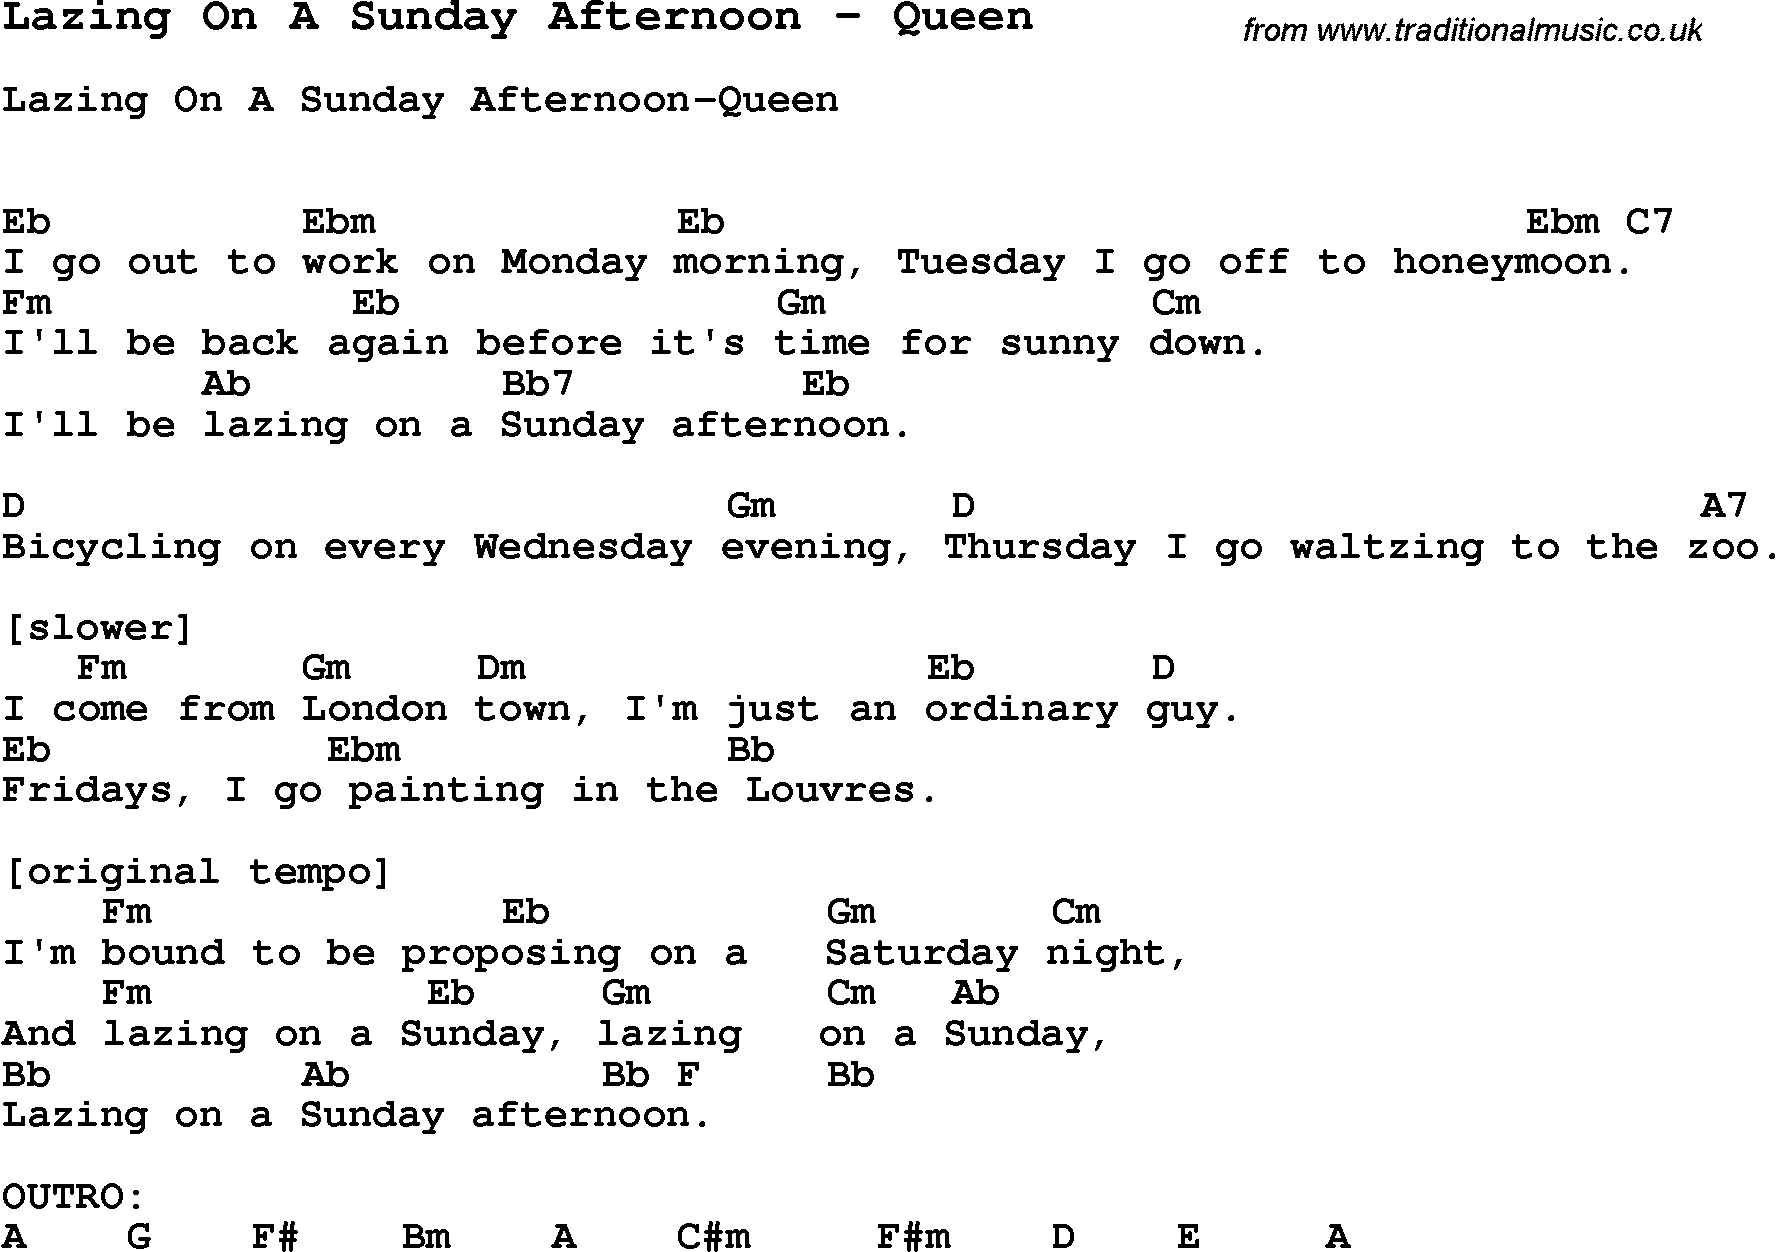 Song Lazing On A Sunday Afternoon by Queen, with lyrics for vocal performance and accompaniment chords for Ukulele, Guitar Banjo etc.